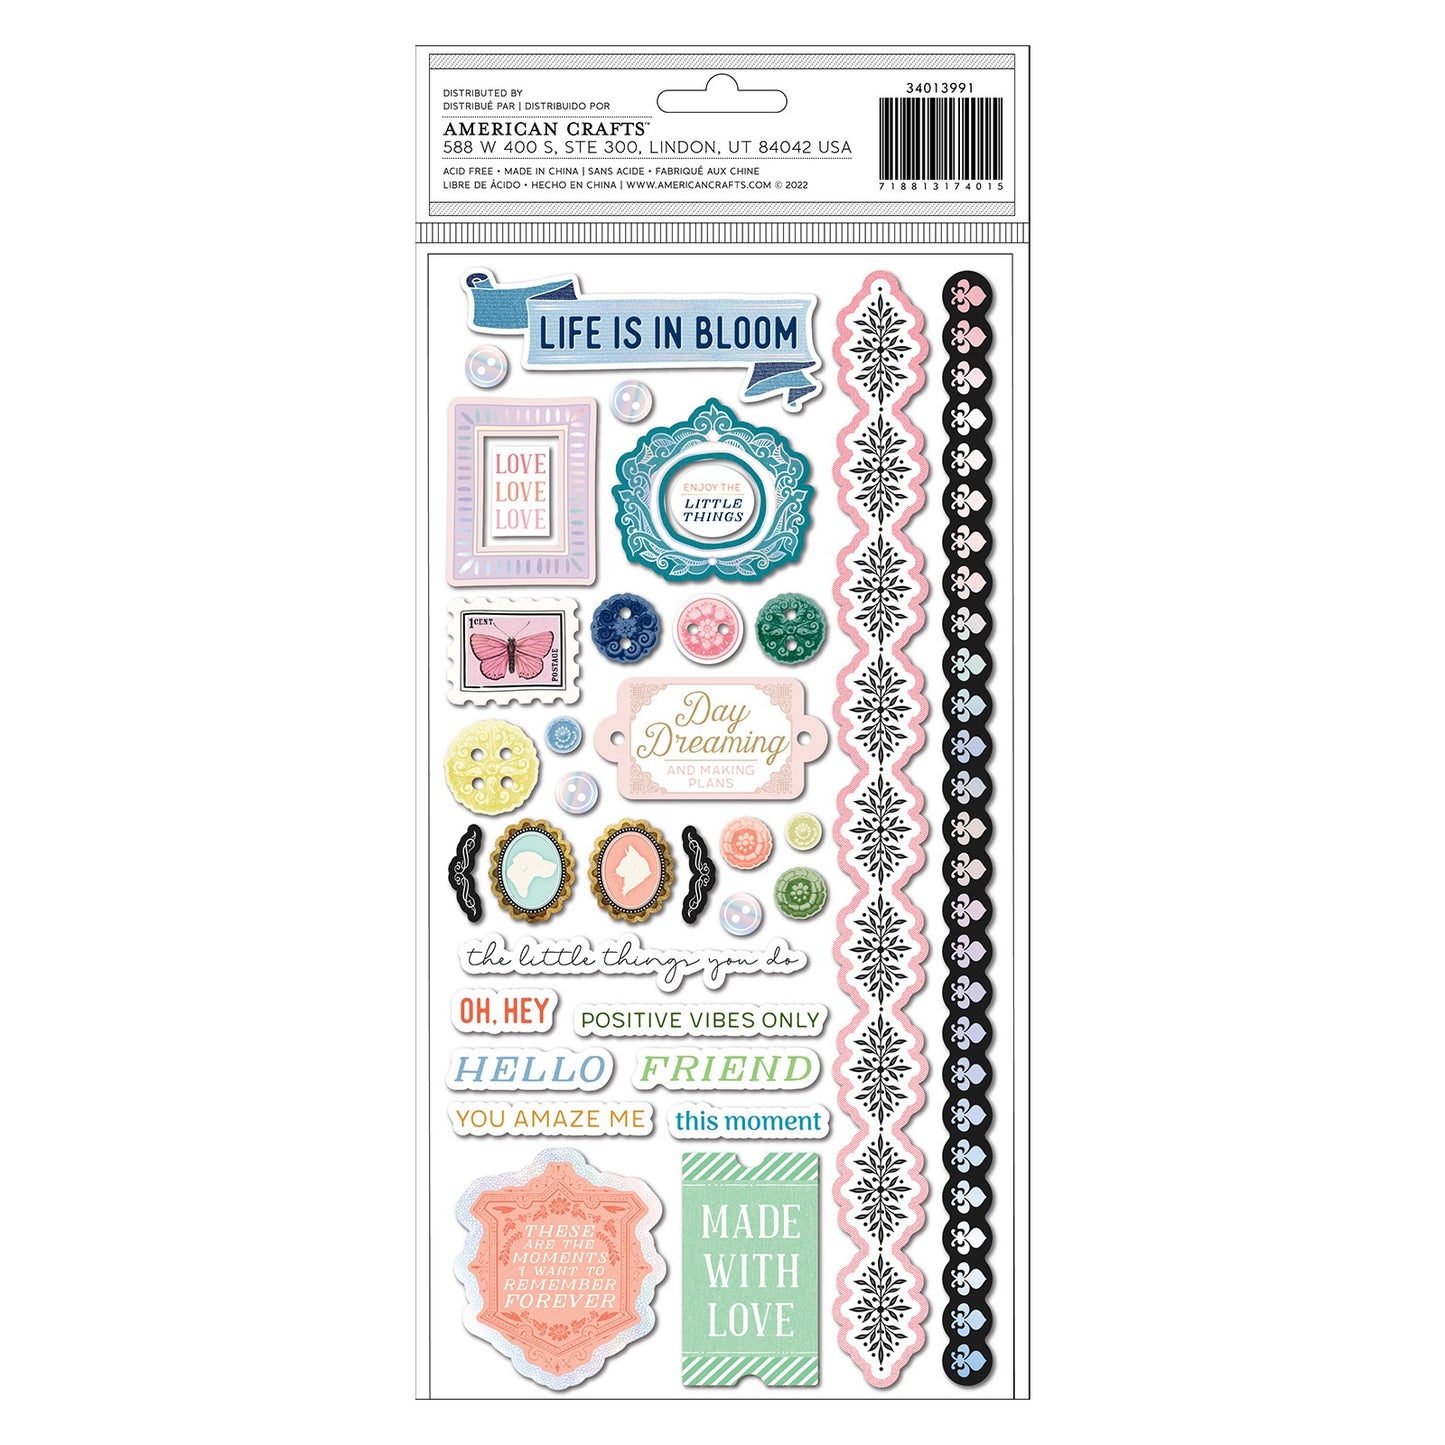 BoBunny Brighton Thickers Stickers 68/Pkg-Beautiful Things Phrase/Chipboard